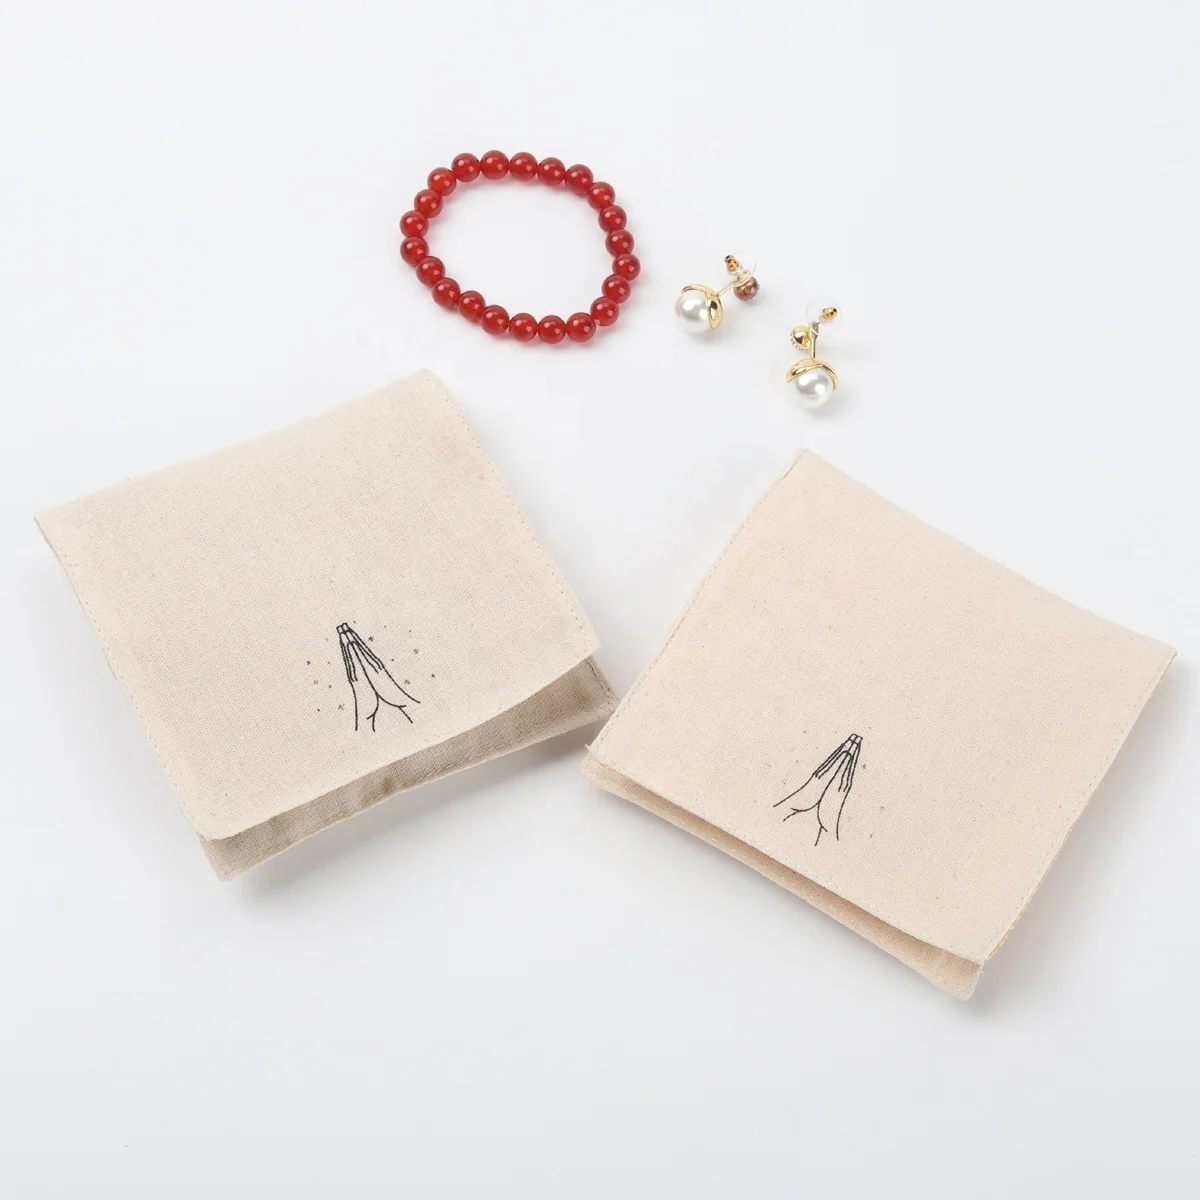 Small Envelope Gift Jewelry Packaging Bag Muslin Envelope Bracelet Necklace Jewelry Pouch